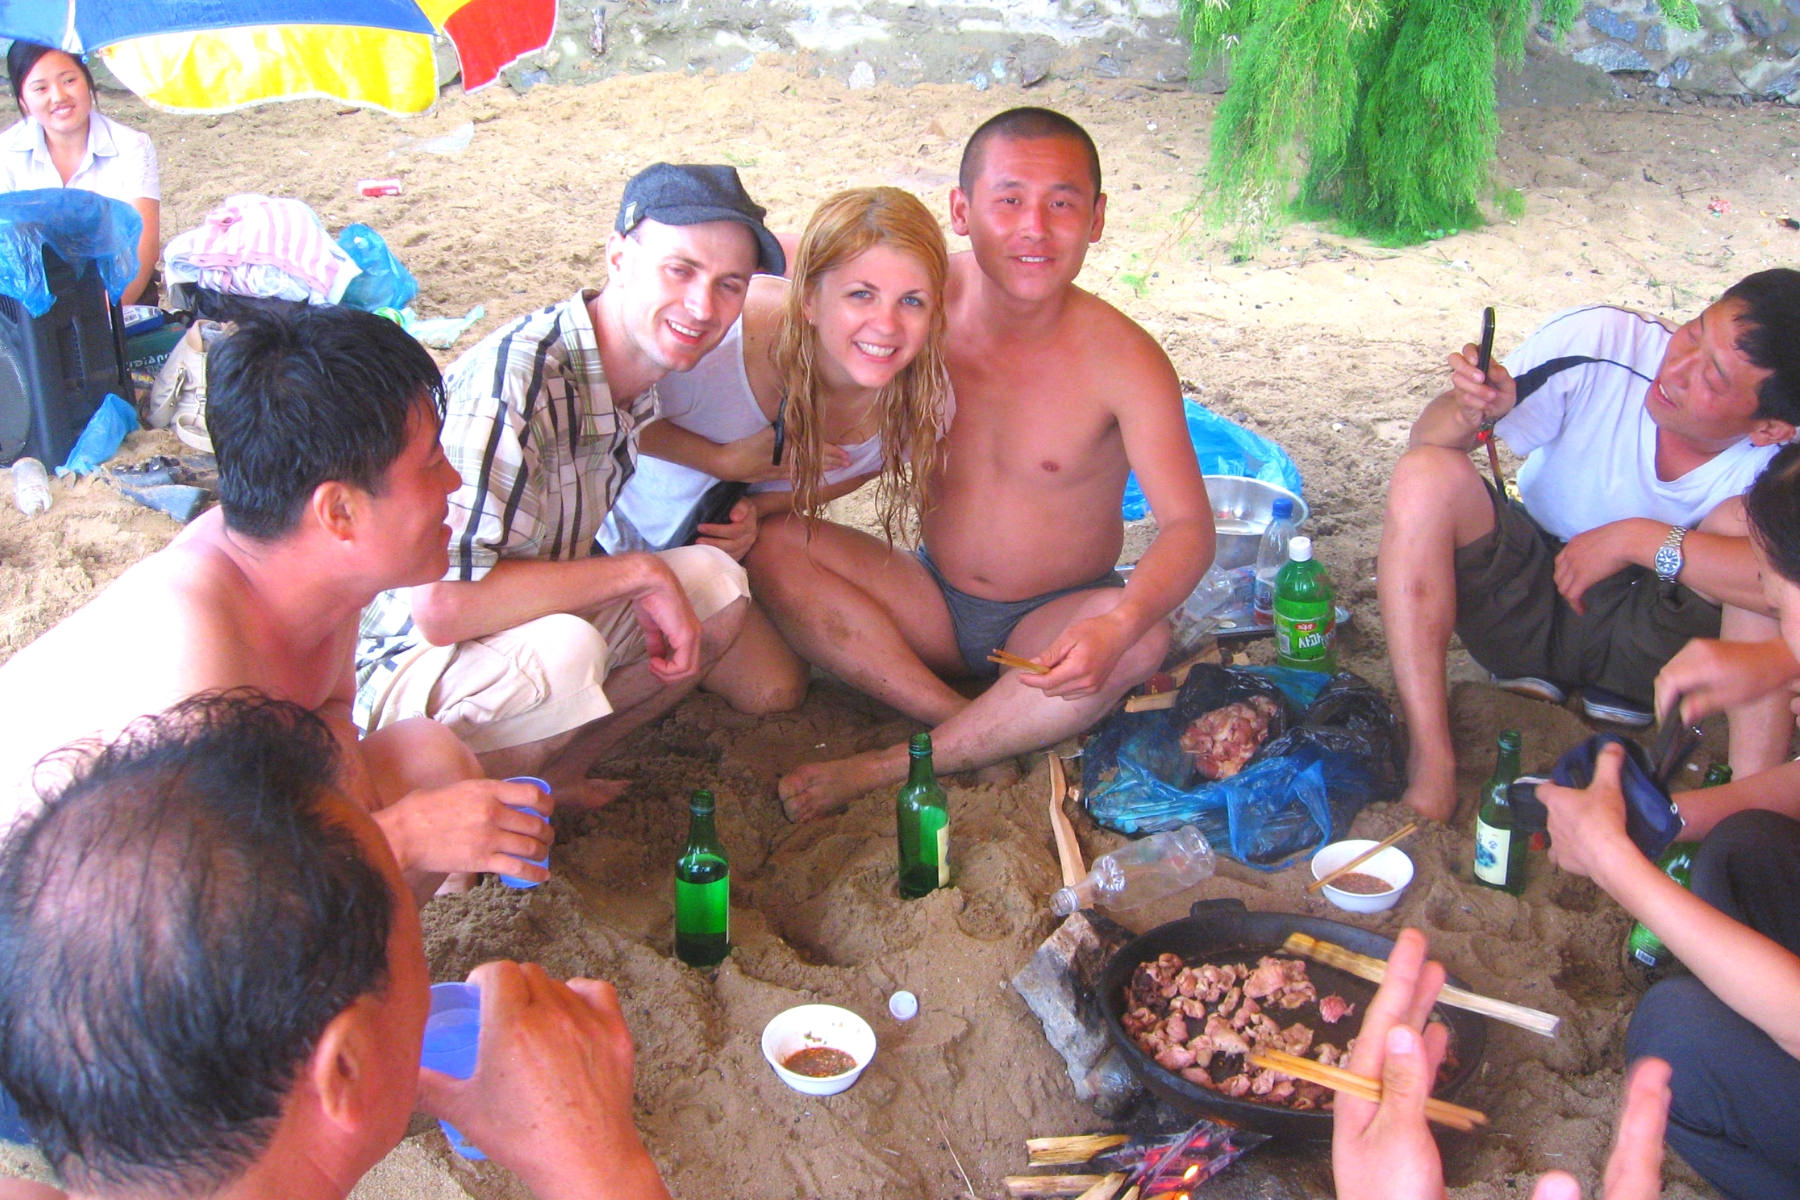 KTG travellers having a picnic with locals in North Korea